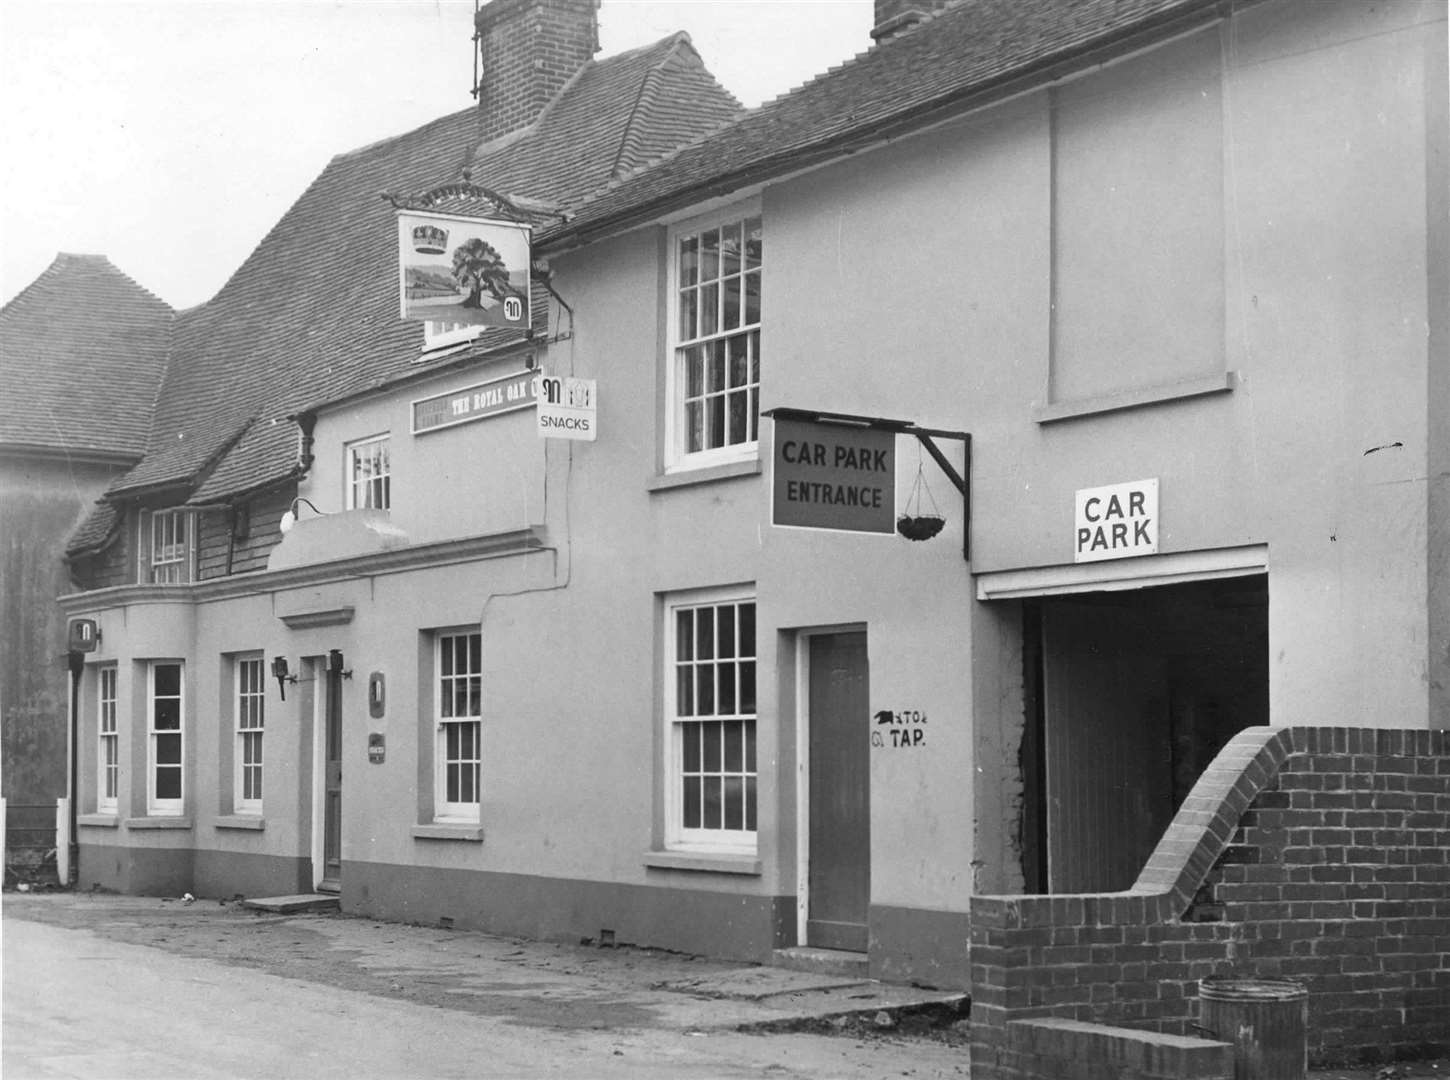 The Royal Oak, which stands on the main road in Mersham, is pictured here in 1974